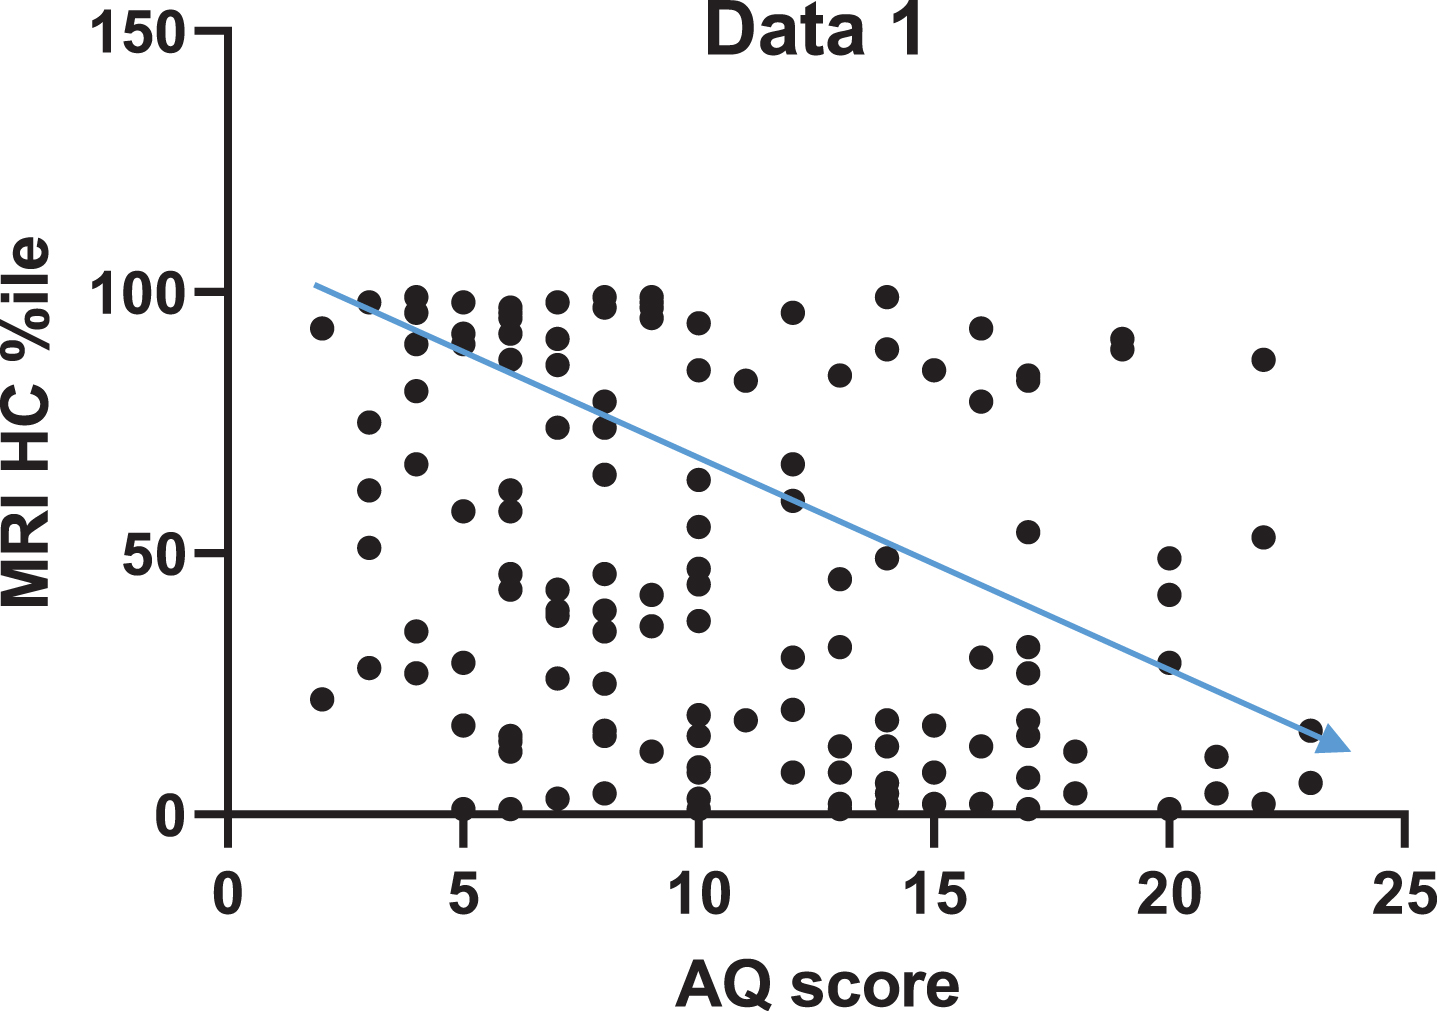 Higher AQ scores are significantly correlated with a decrease in HC volume, as indicated by the inverse proportionality between AQ score and HC volume.